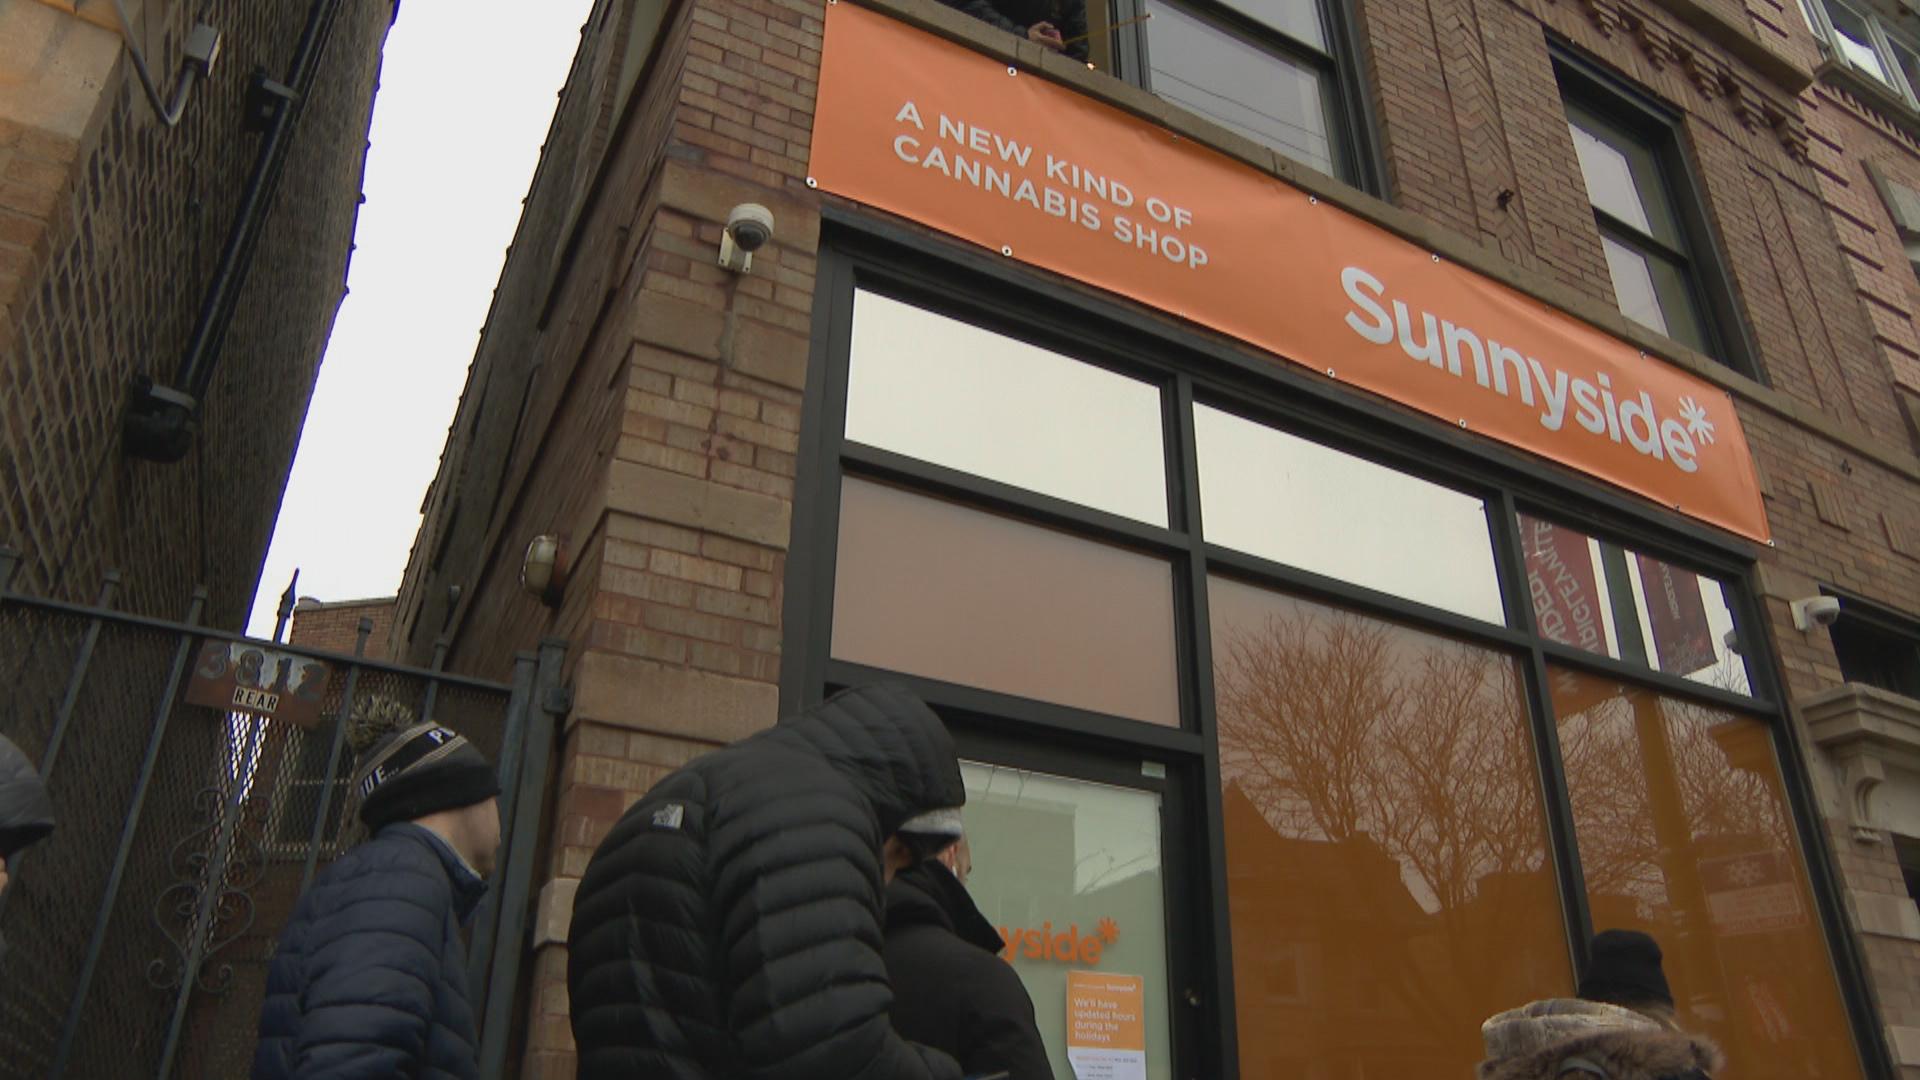 In Lakeview, workers were busy putting the finishing touches on the Sunnyside dispensary just two days before recreational marijuana becomes legal in Illinois. (WTTW News)